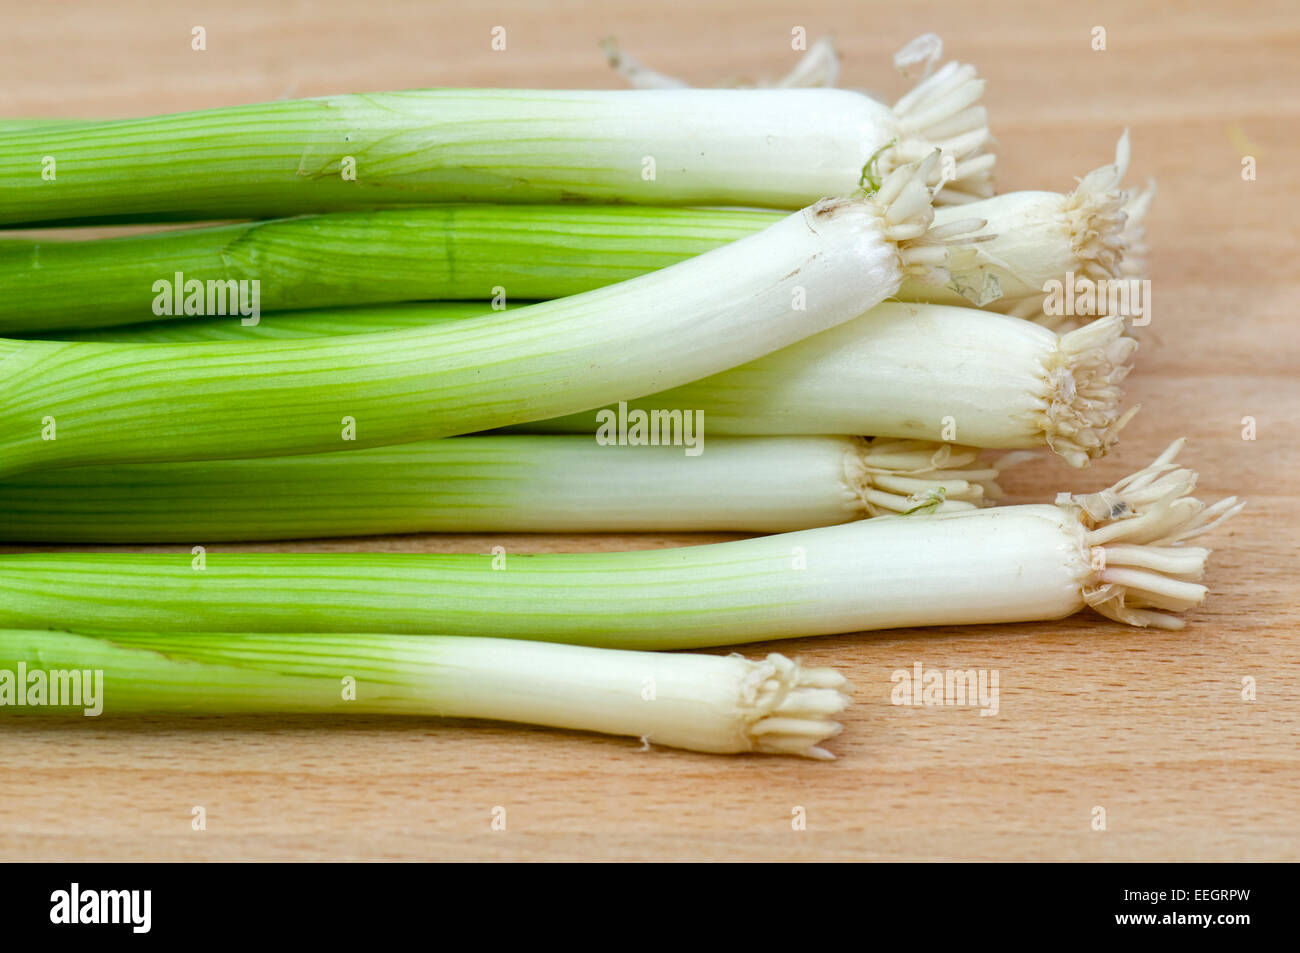 Spring onions or scallions on chopping board Stock Photo